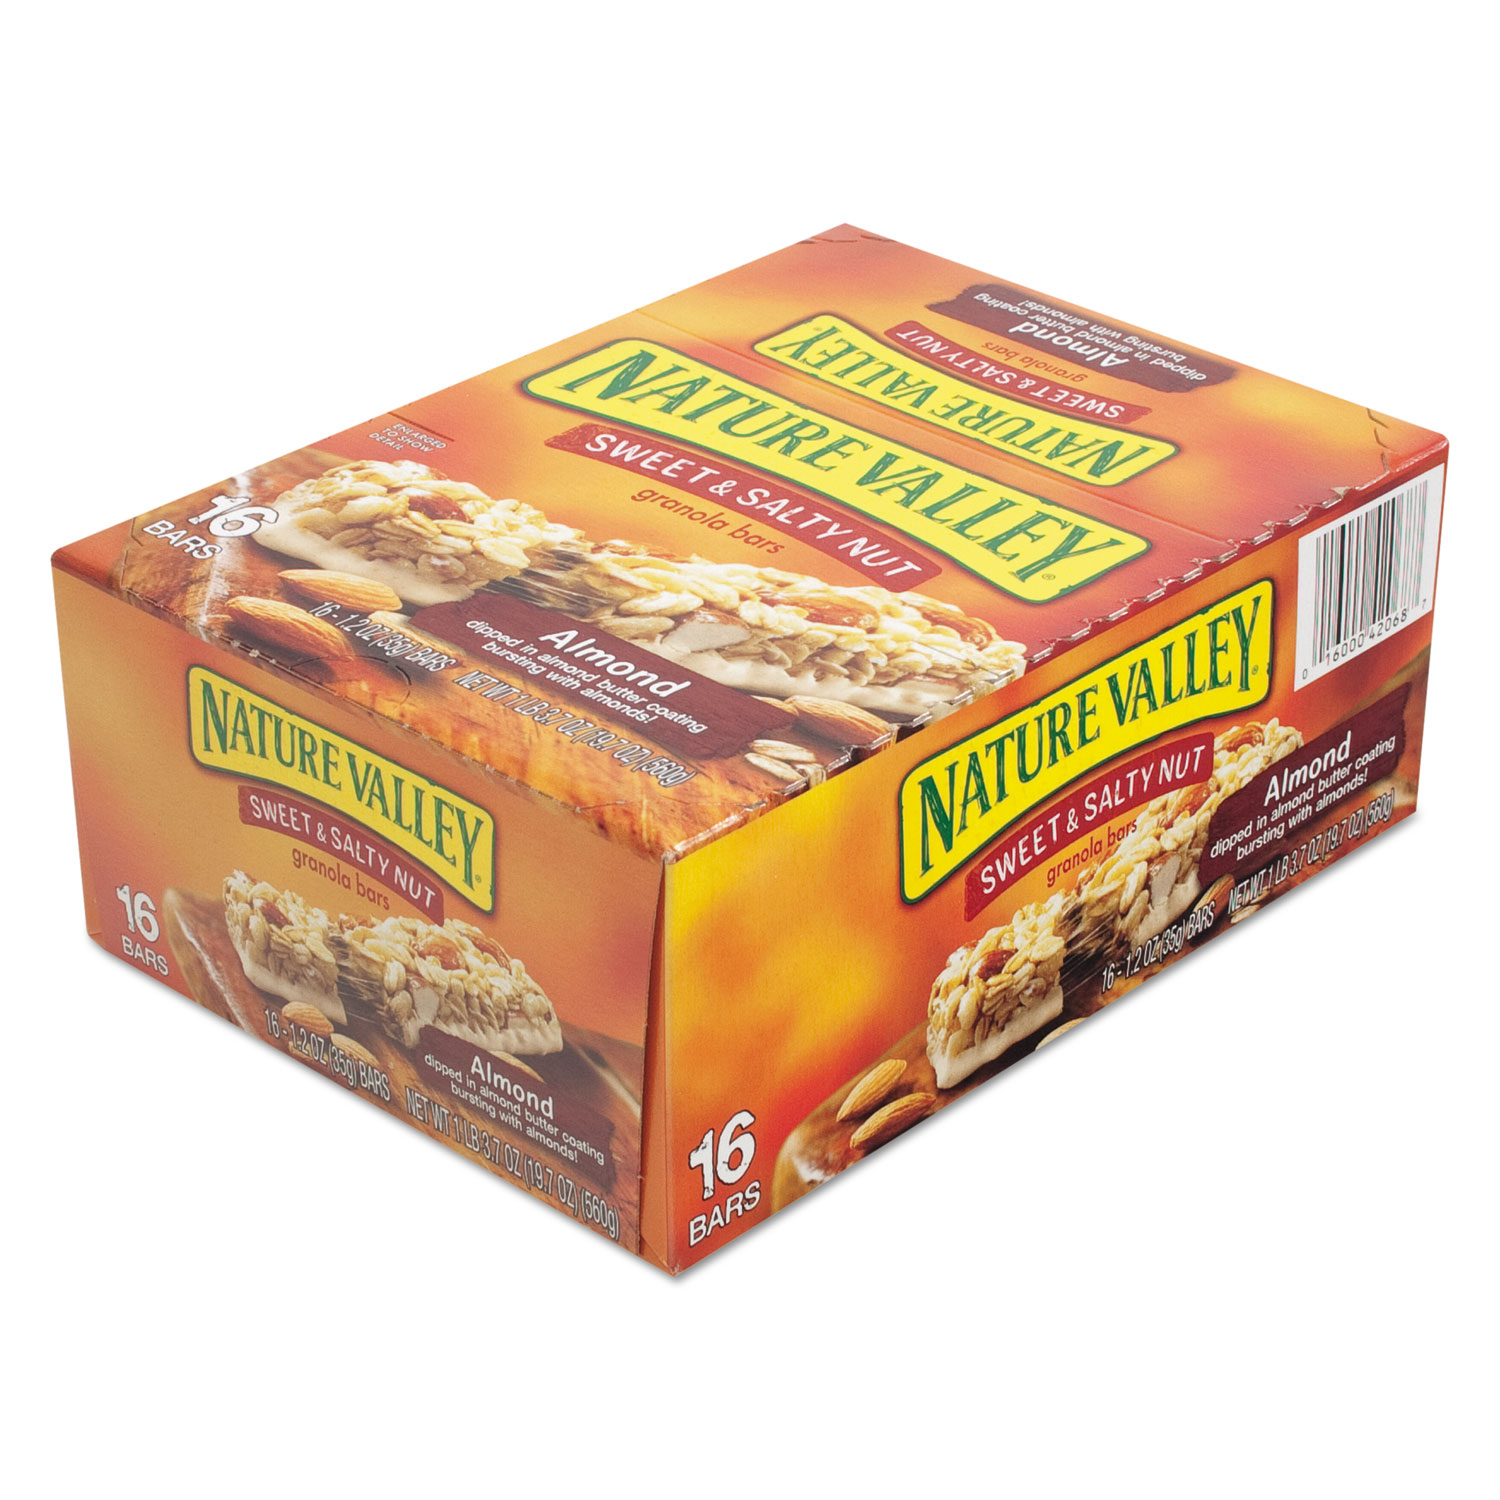 Nature Valley Granola Bars, Sweet & Salty Nut Almond Cereal, 1.2oz Bar, 16/Box